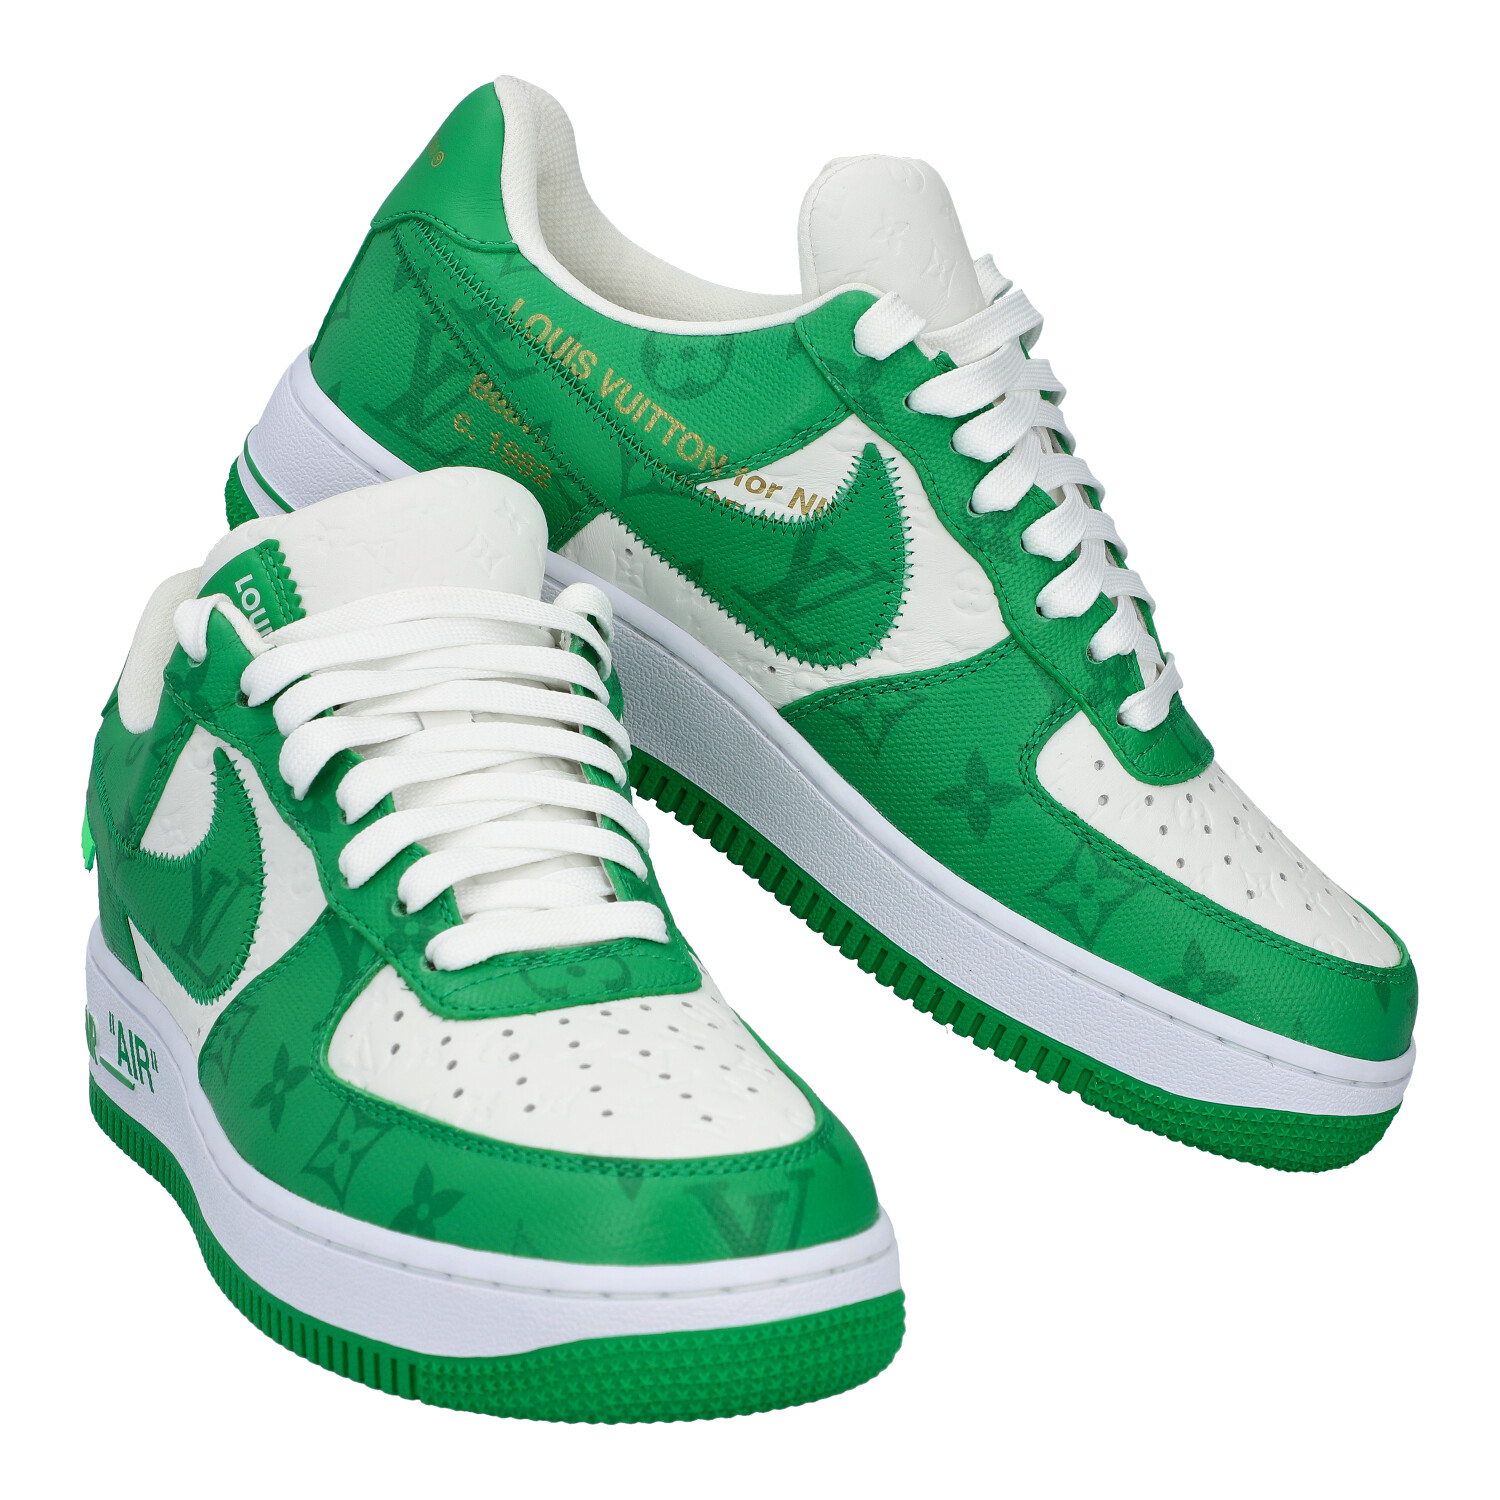 LOUIS VUITTON x NIKE Sneakers "AIR FORCE 1", Gr. 40,5 (7,5). - Image 7 of 7